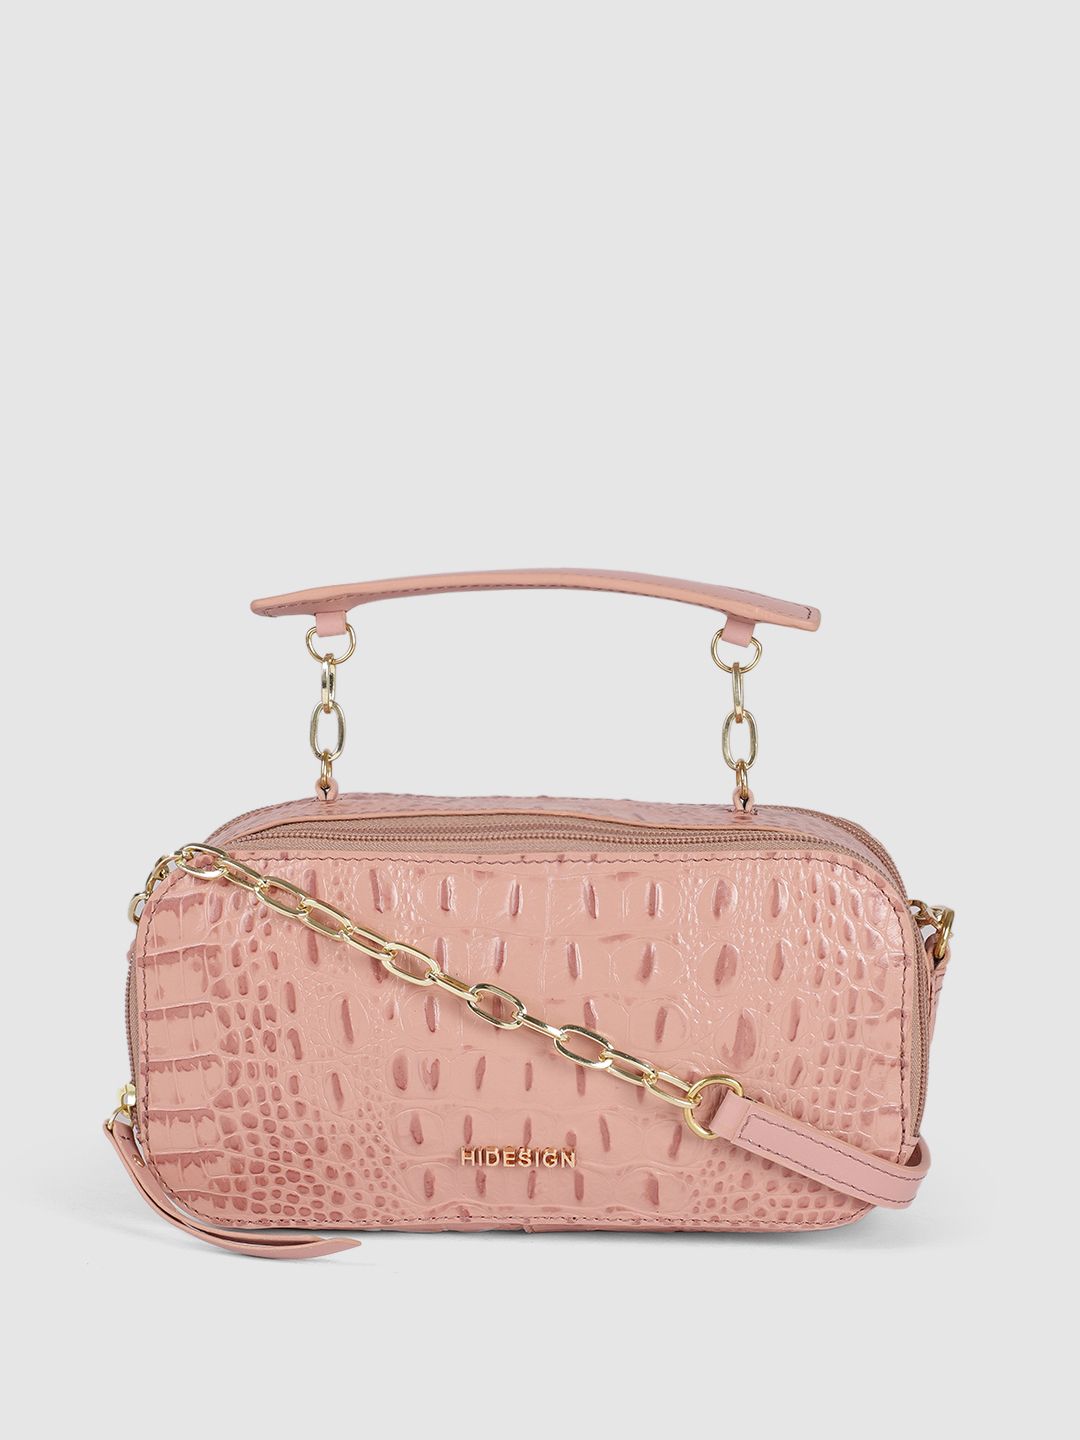 Hidesign Women Pink Textured Leather Sling Bag Price in India